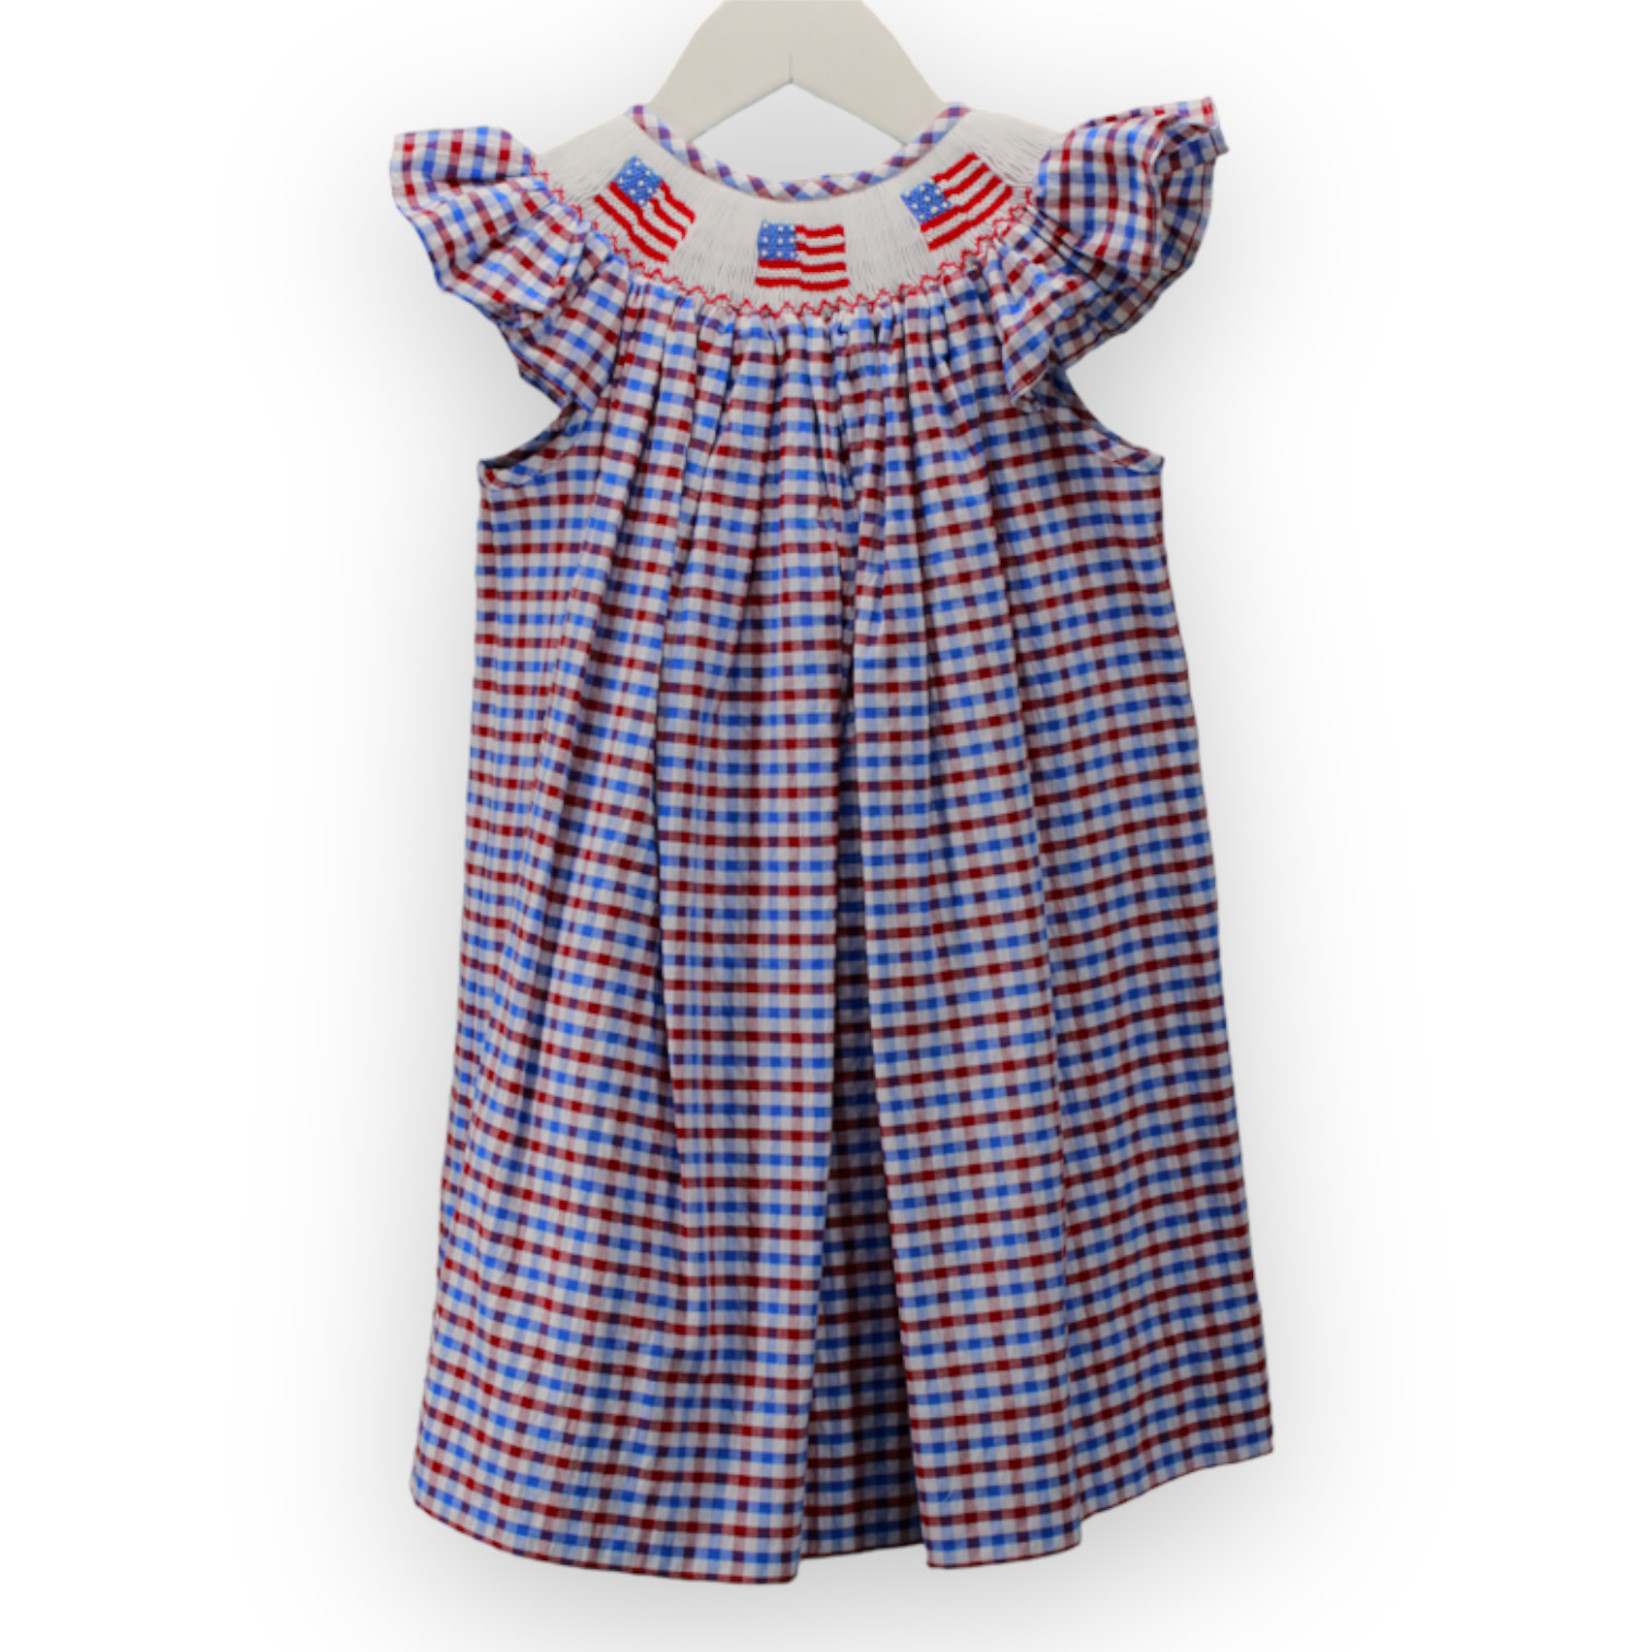 Charming Little One USA Smocked Dress